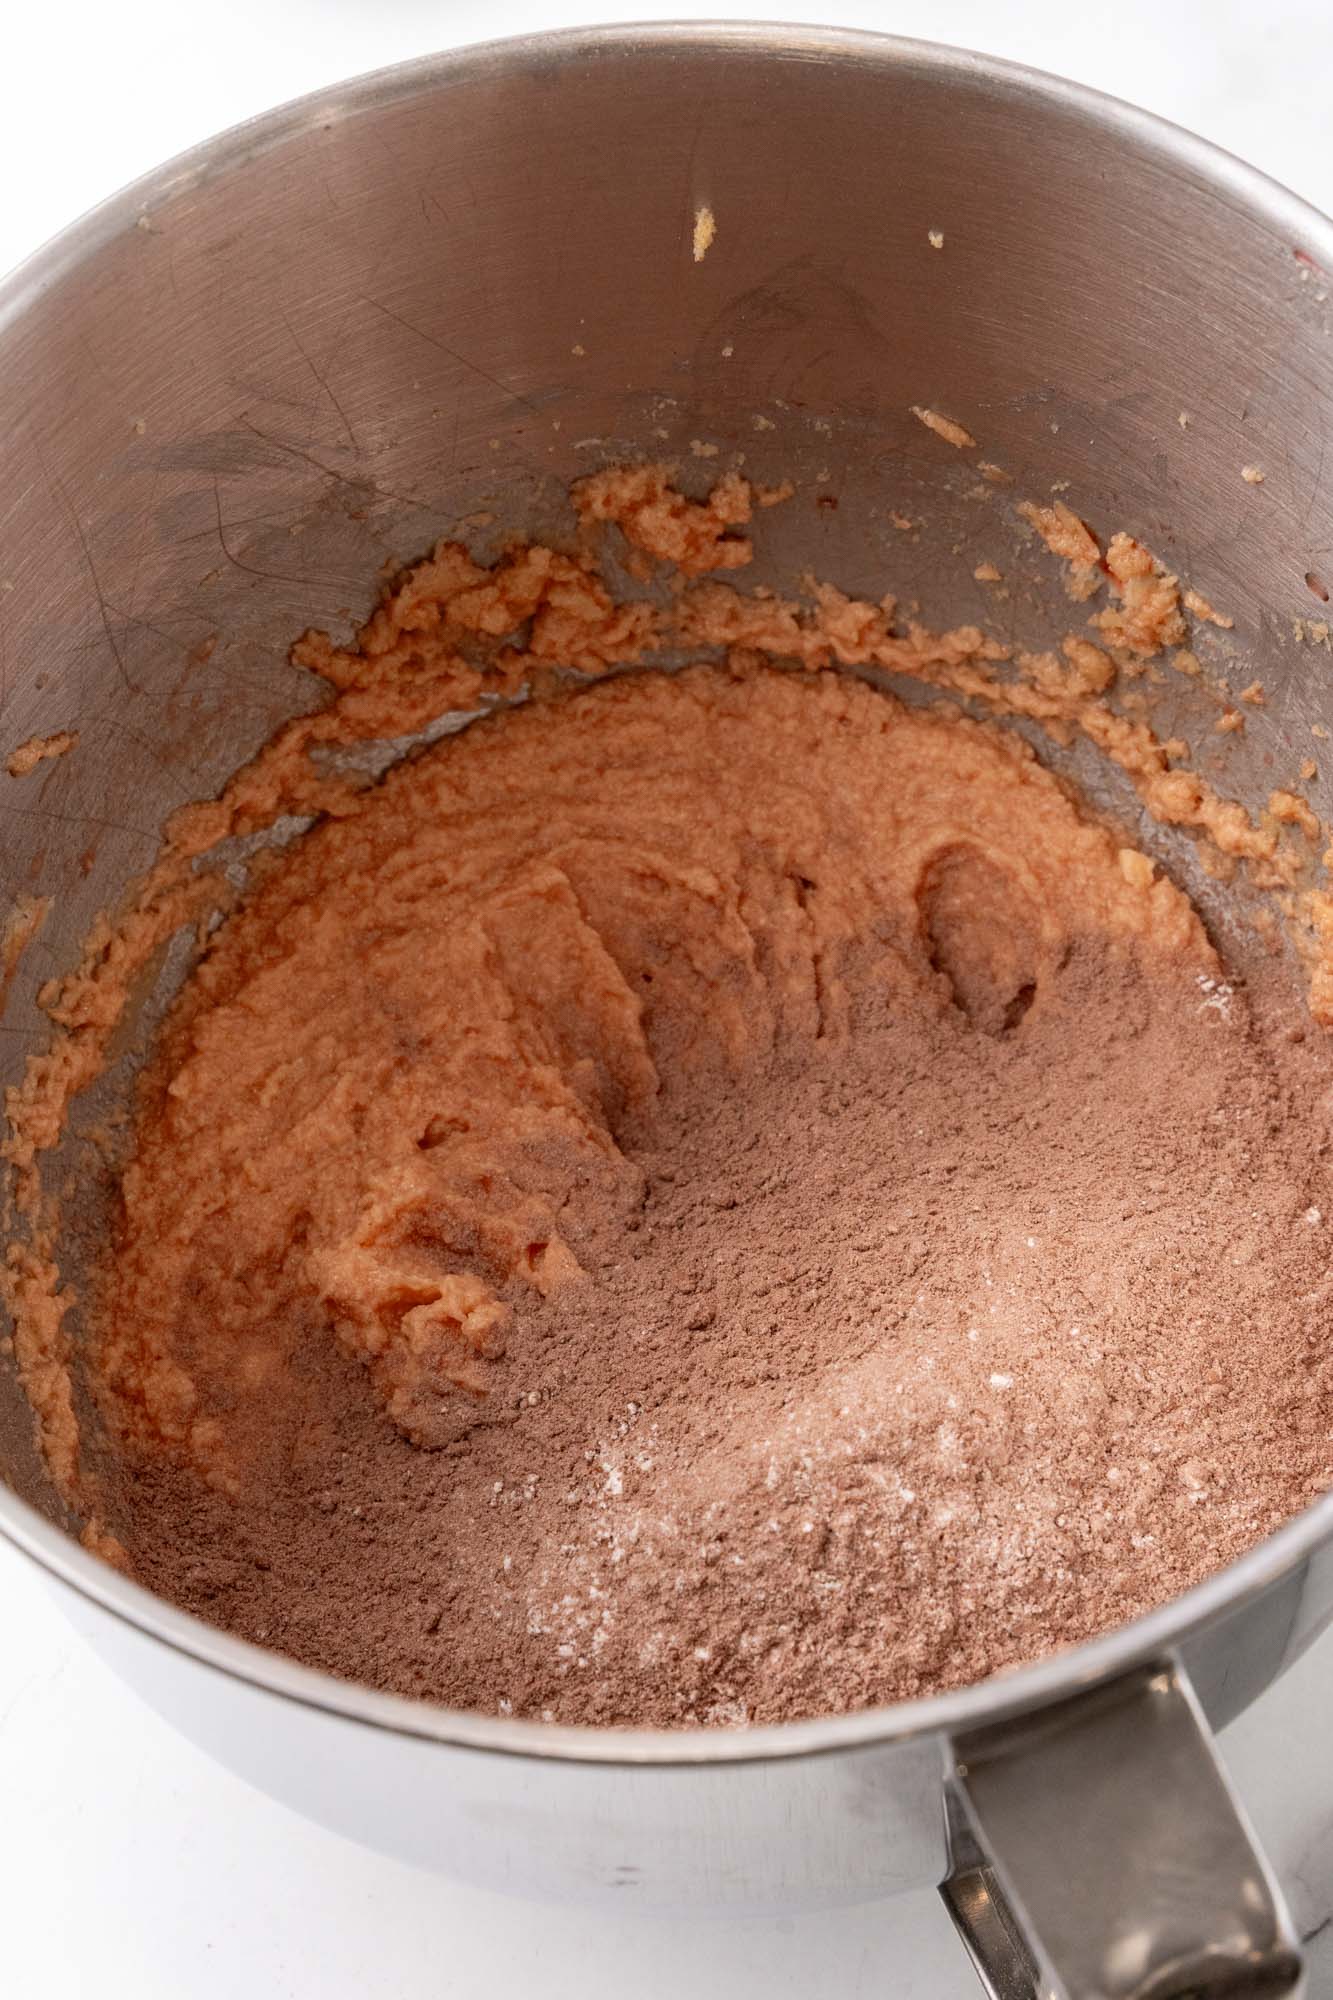 dry ingredients added to wet ingredients to make chocolate cookies, in a metal mixer bowl.